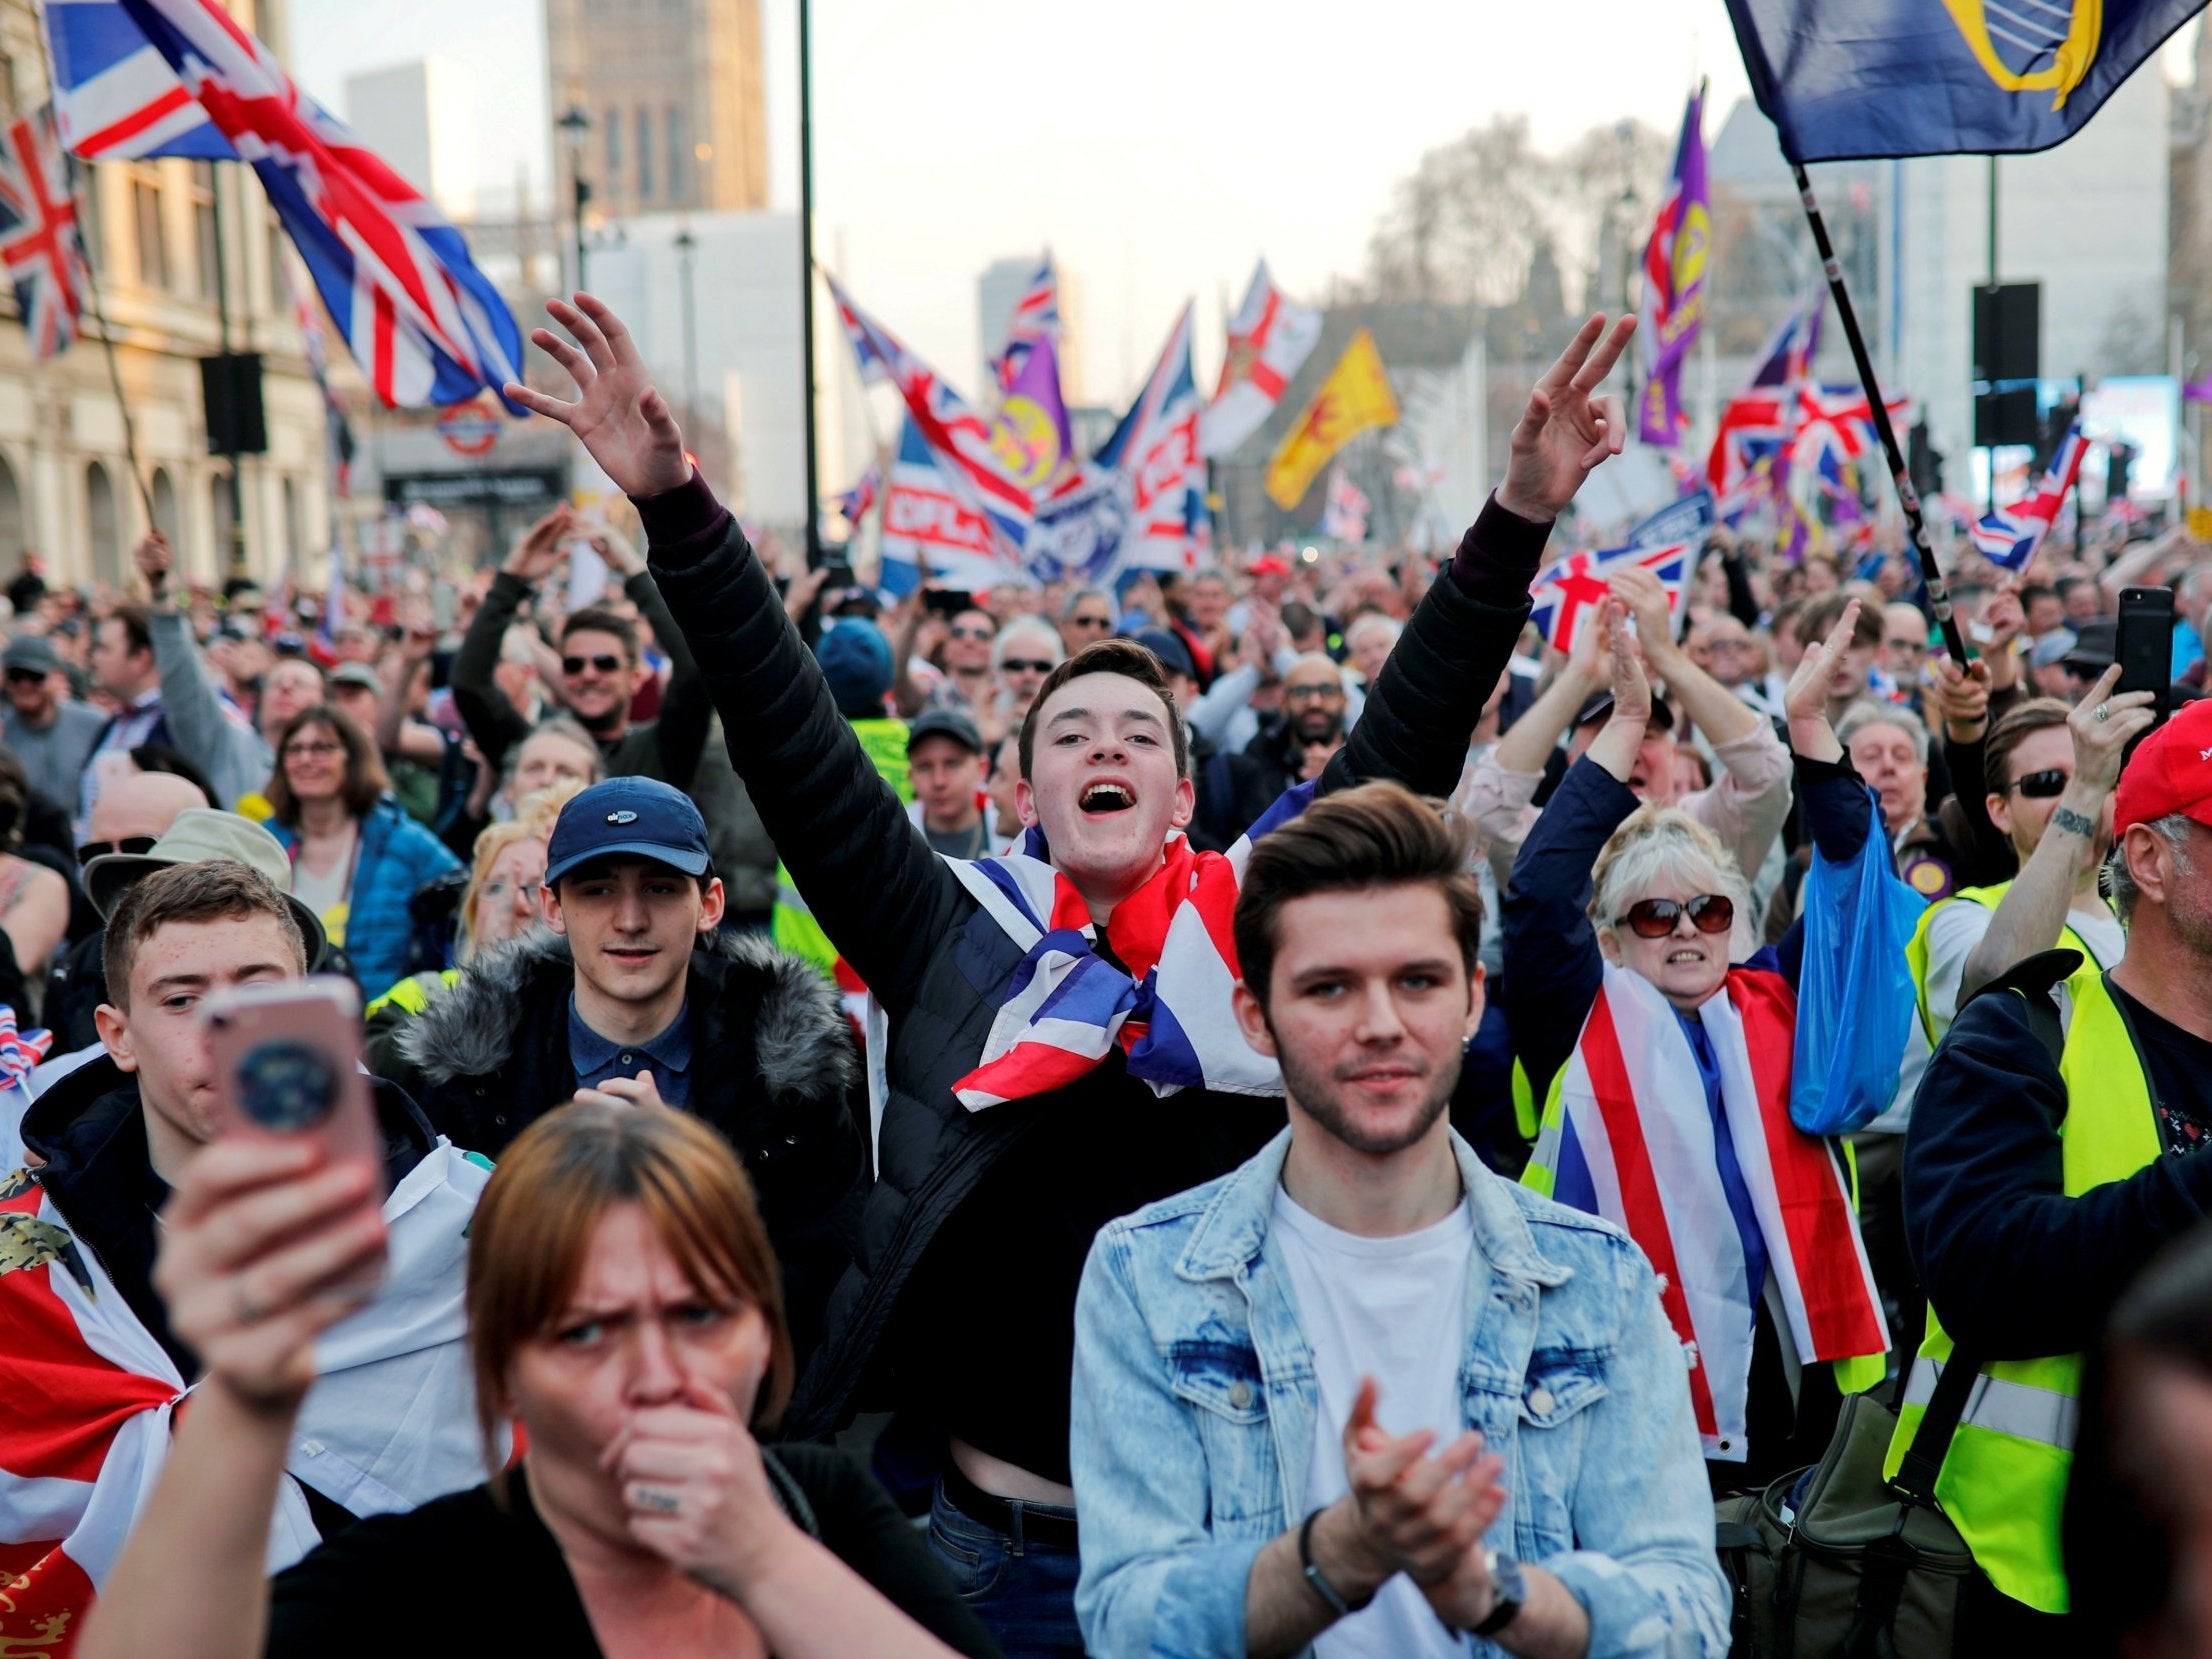 Pro-Brexit protesters at Parliament Square on 29 March